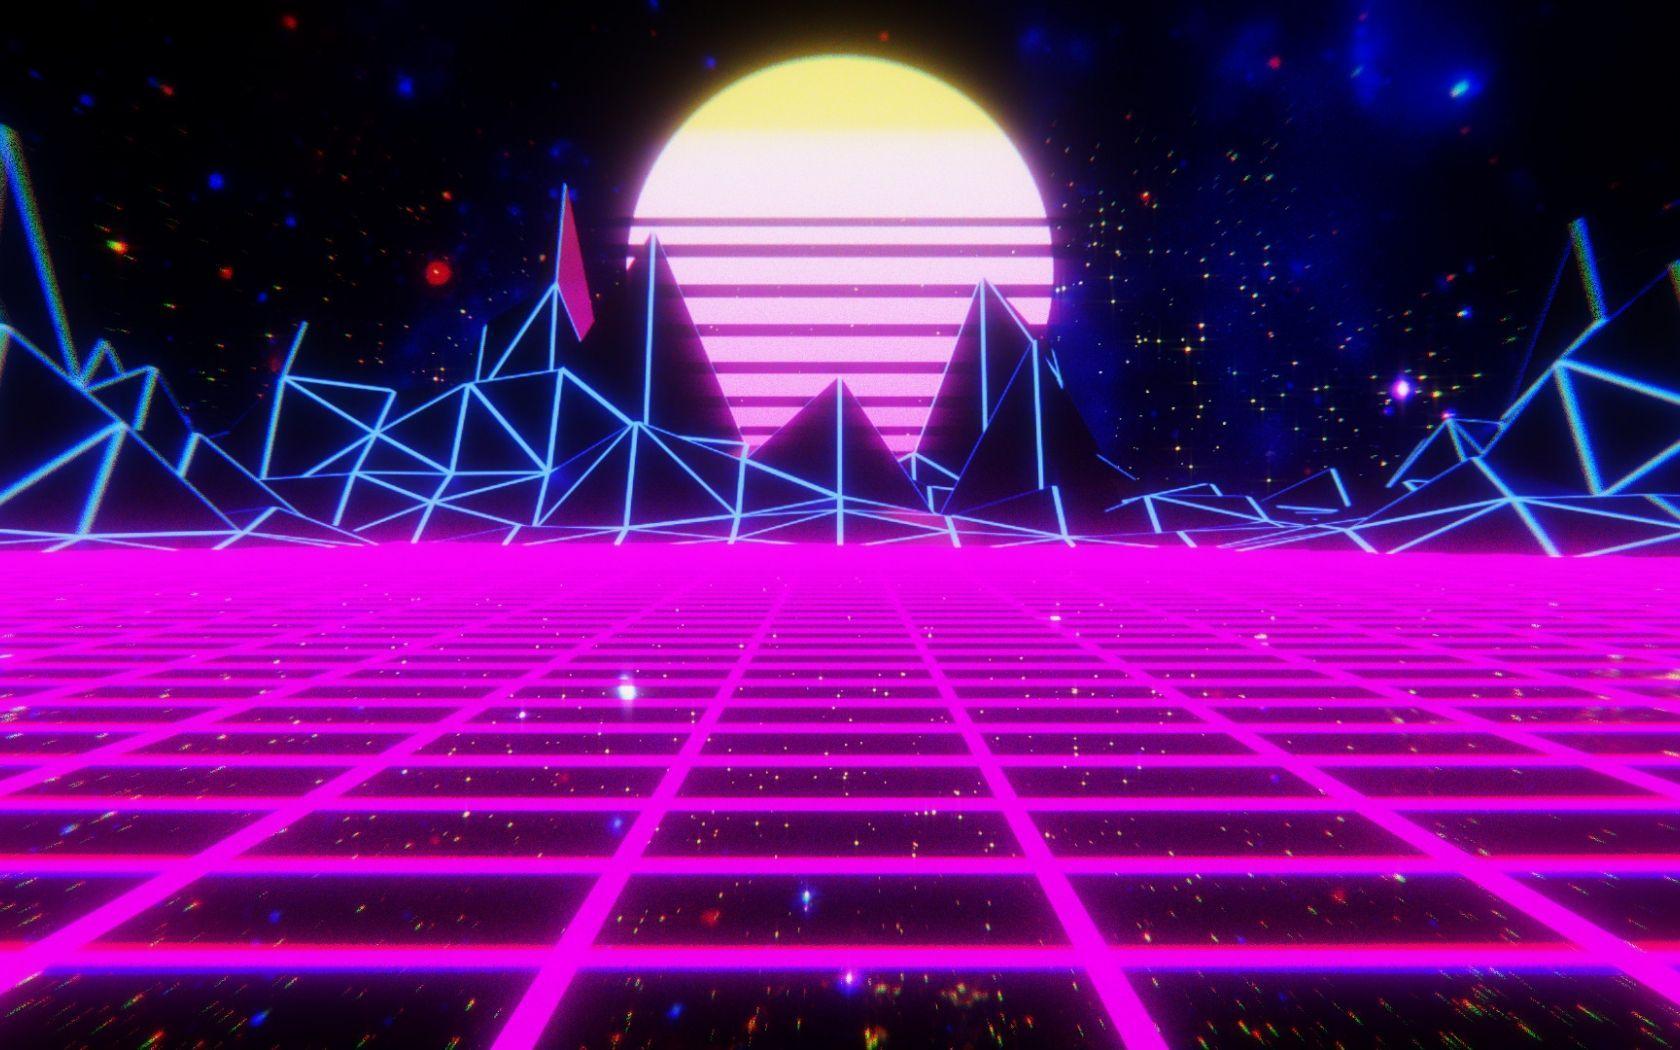 Synthwave Hd Wallpapers Top Free Synthwave Hd Backgrounds Wallpaperaccess 0577